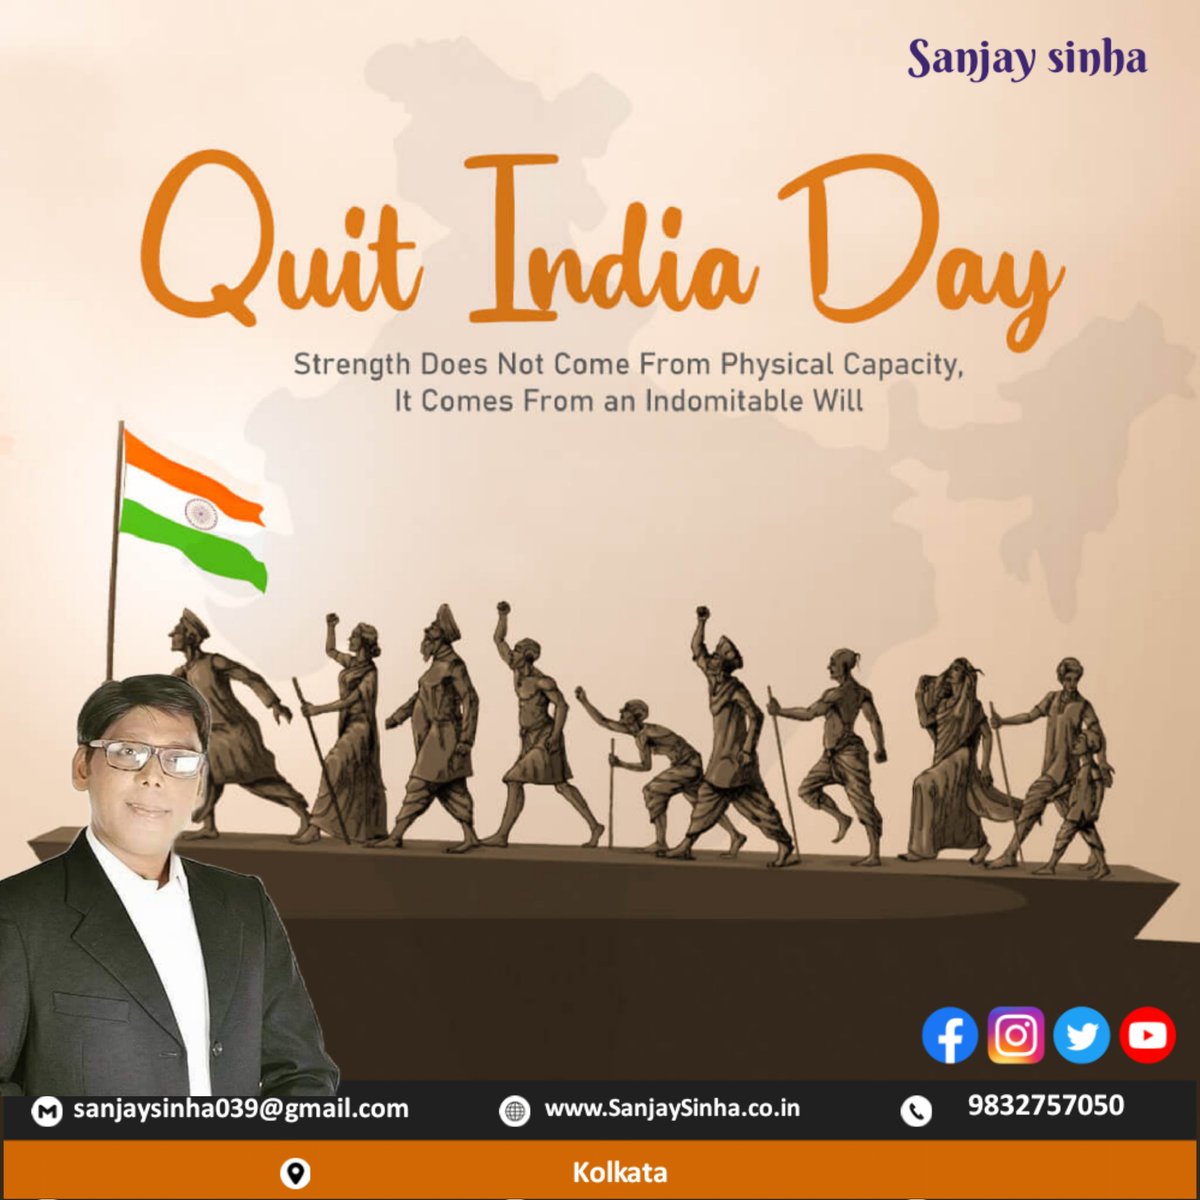 9th August: #TheDayInHistory 

August 9 is the 81st anniversary of the Quit India Movement, which #MahatmaGandhi called the biggest struggle of his life. The Day is celebrated as #AugustKrantiDay by paying tributes to freedom fighters. Salute to our freedom fighters. #Jaihind